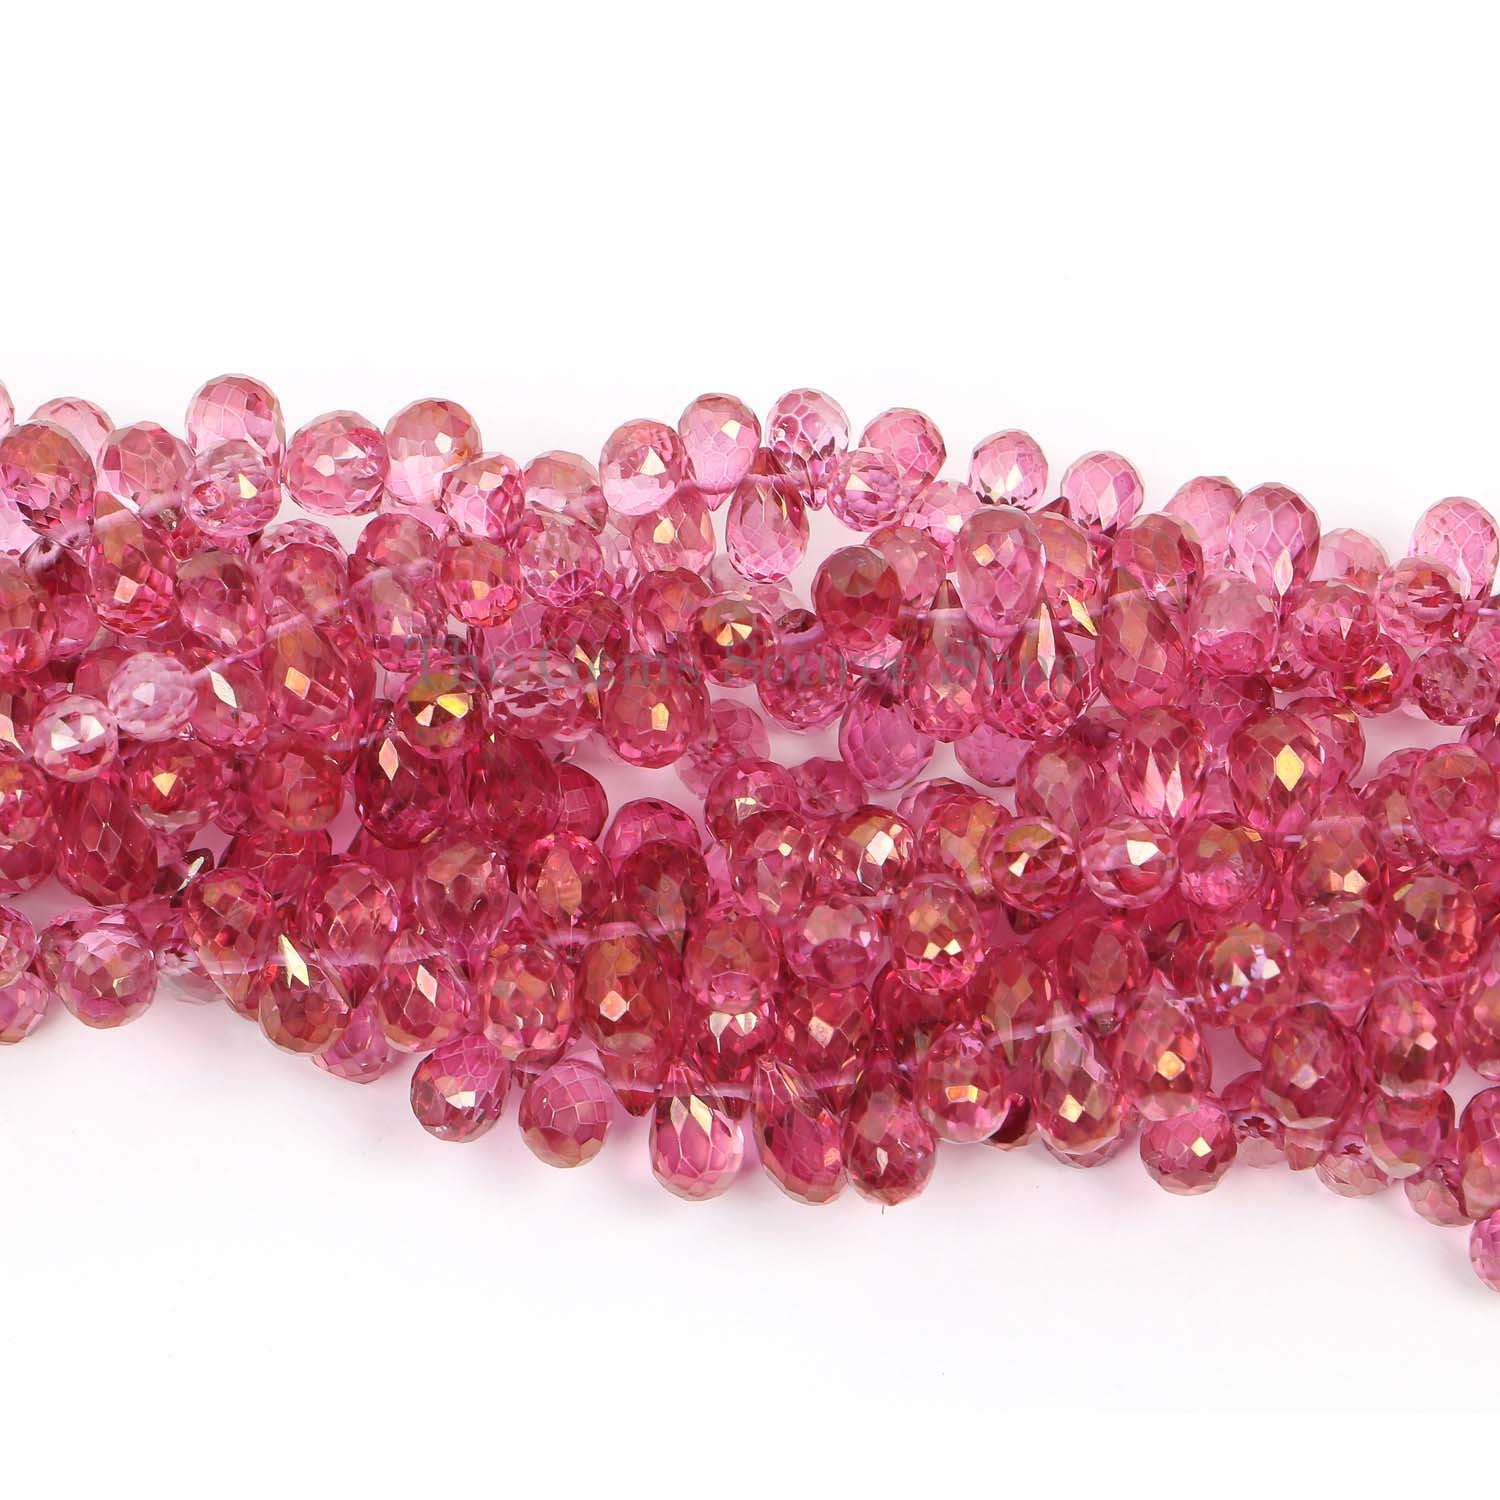 Pink Mystic Topaz Faceted Drops Beads, Gemstone Beads, Tear Drop Briolette